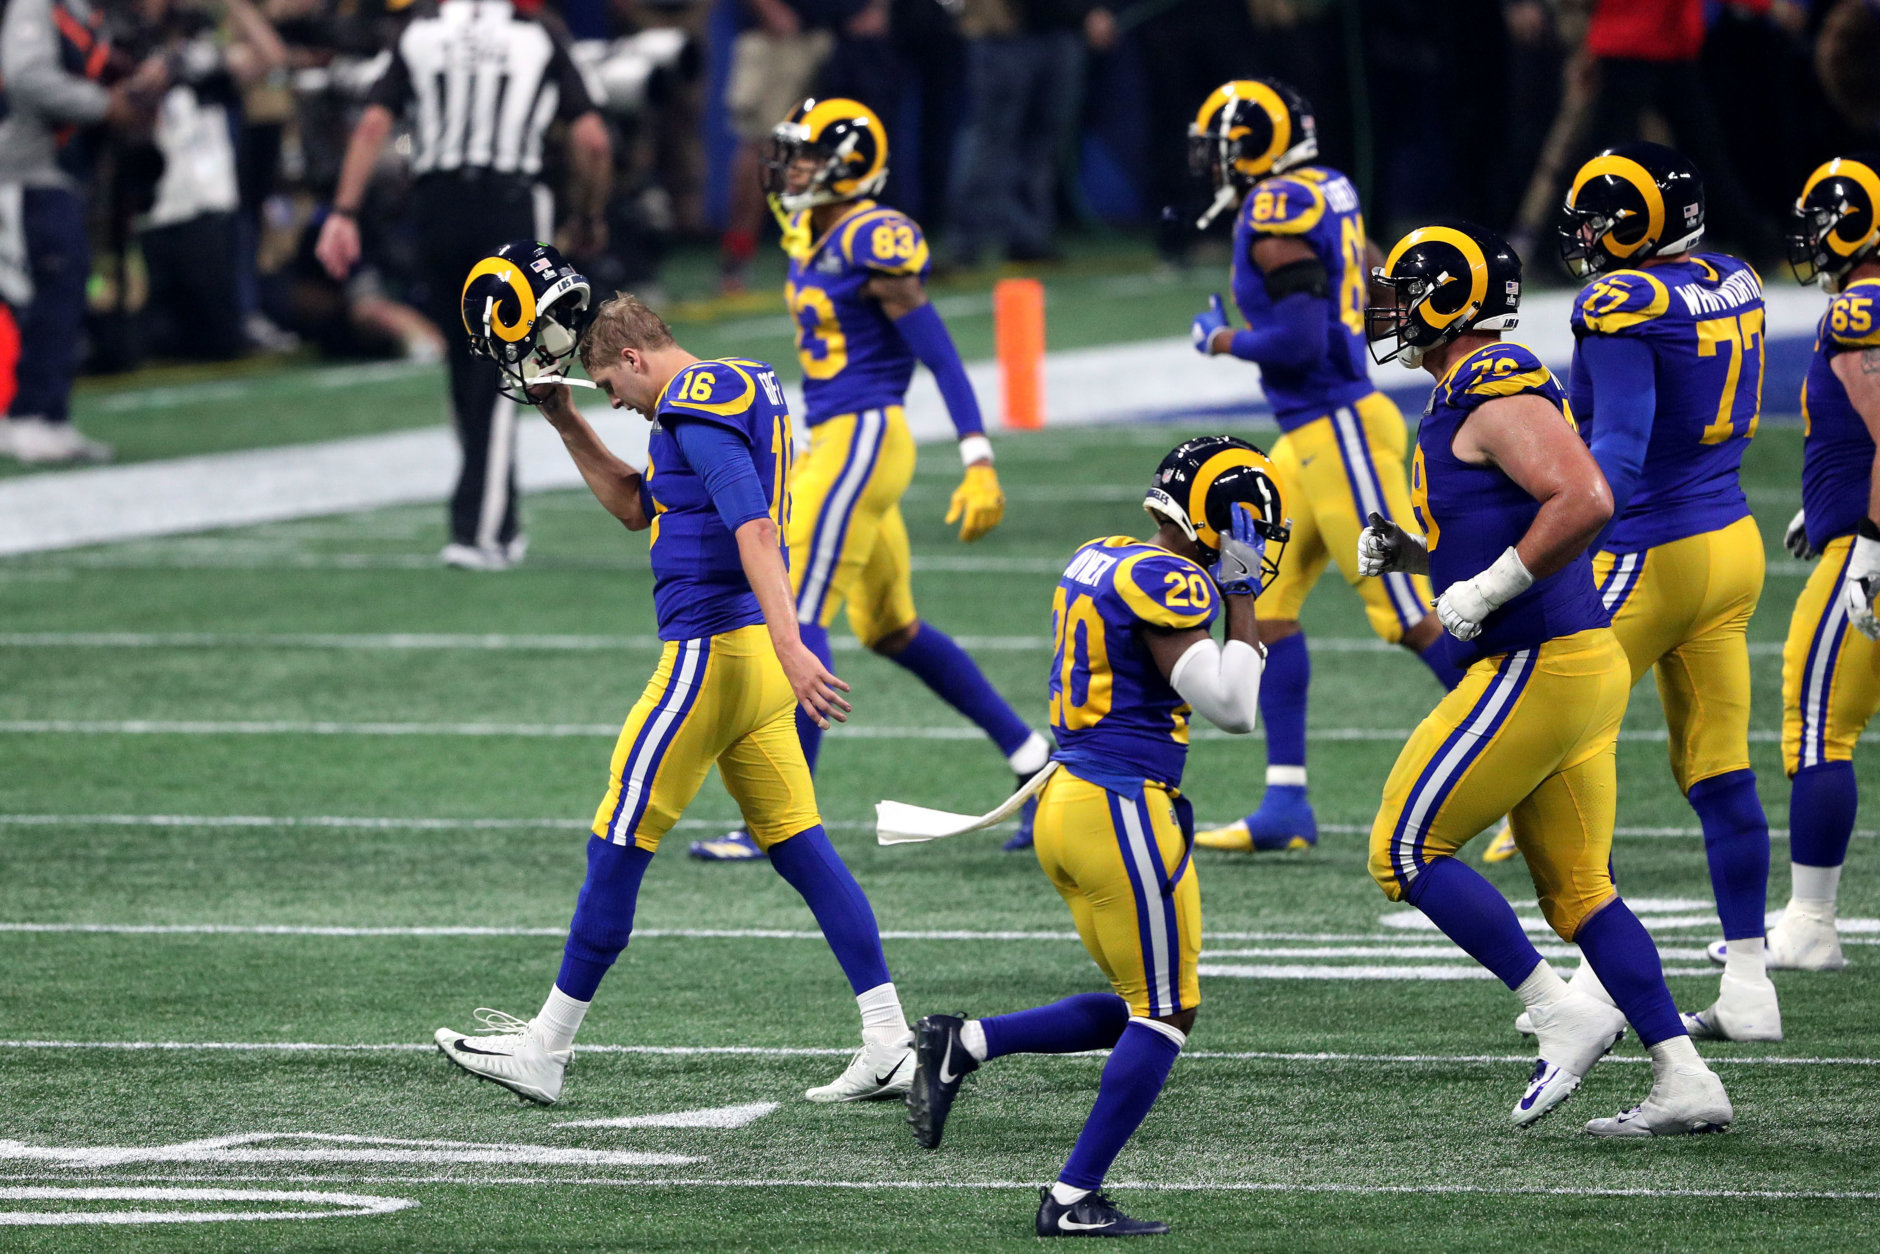 ATLANTA, GEORGIA - FEBRUARY 03: Jared Goff #16 of the Los Angeles Rams reacts against the New England Patriots in the second half during Super Bowl LIII at Mercedes-Benz Stadium on February 03, 2019 in Atlanta, Georgia. (Photo by Patrick Smith/Getty Images)